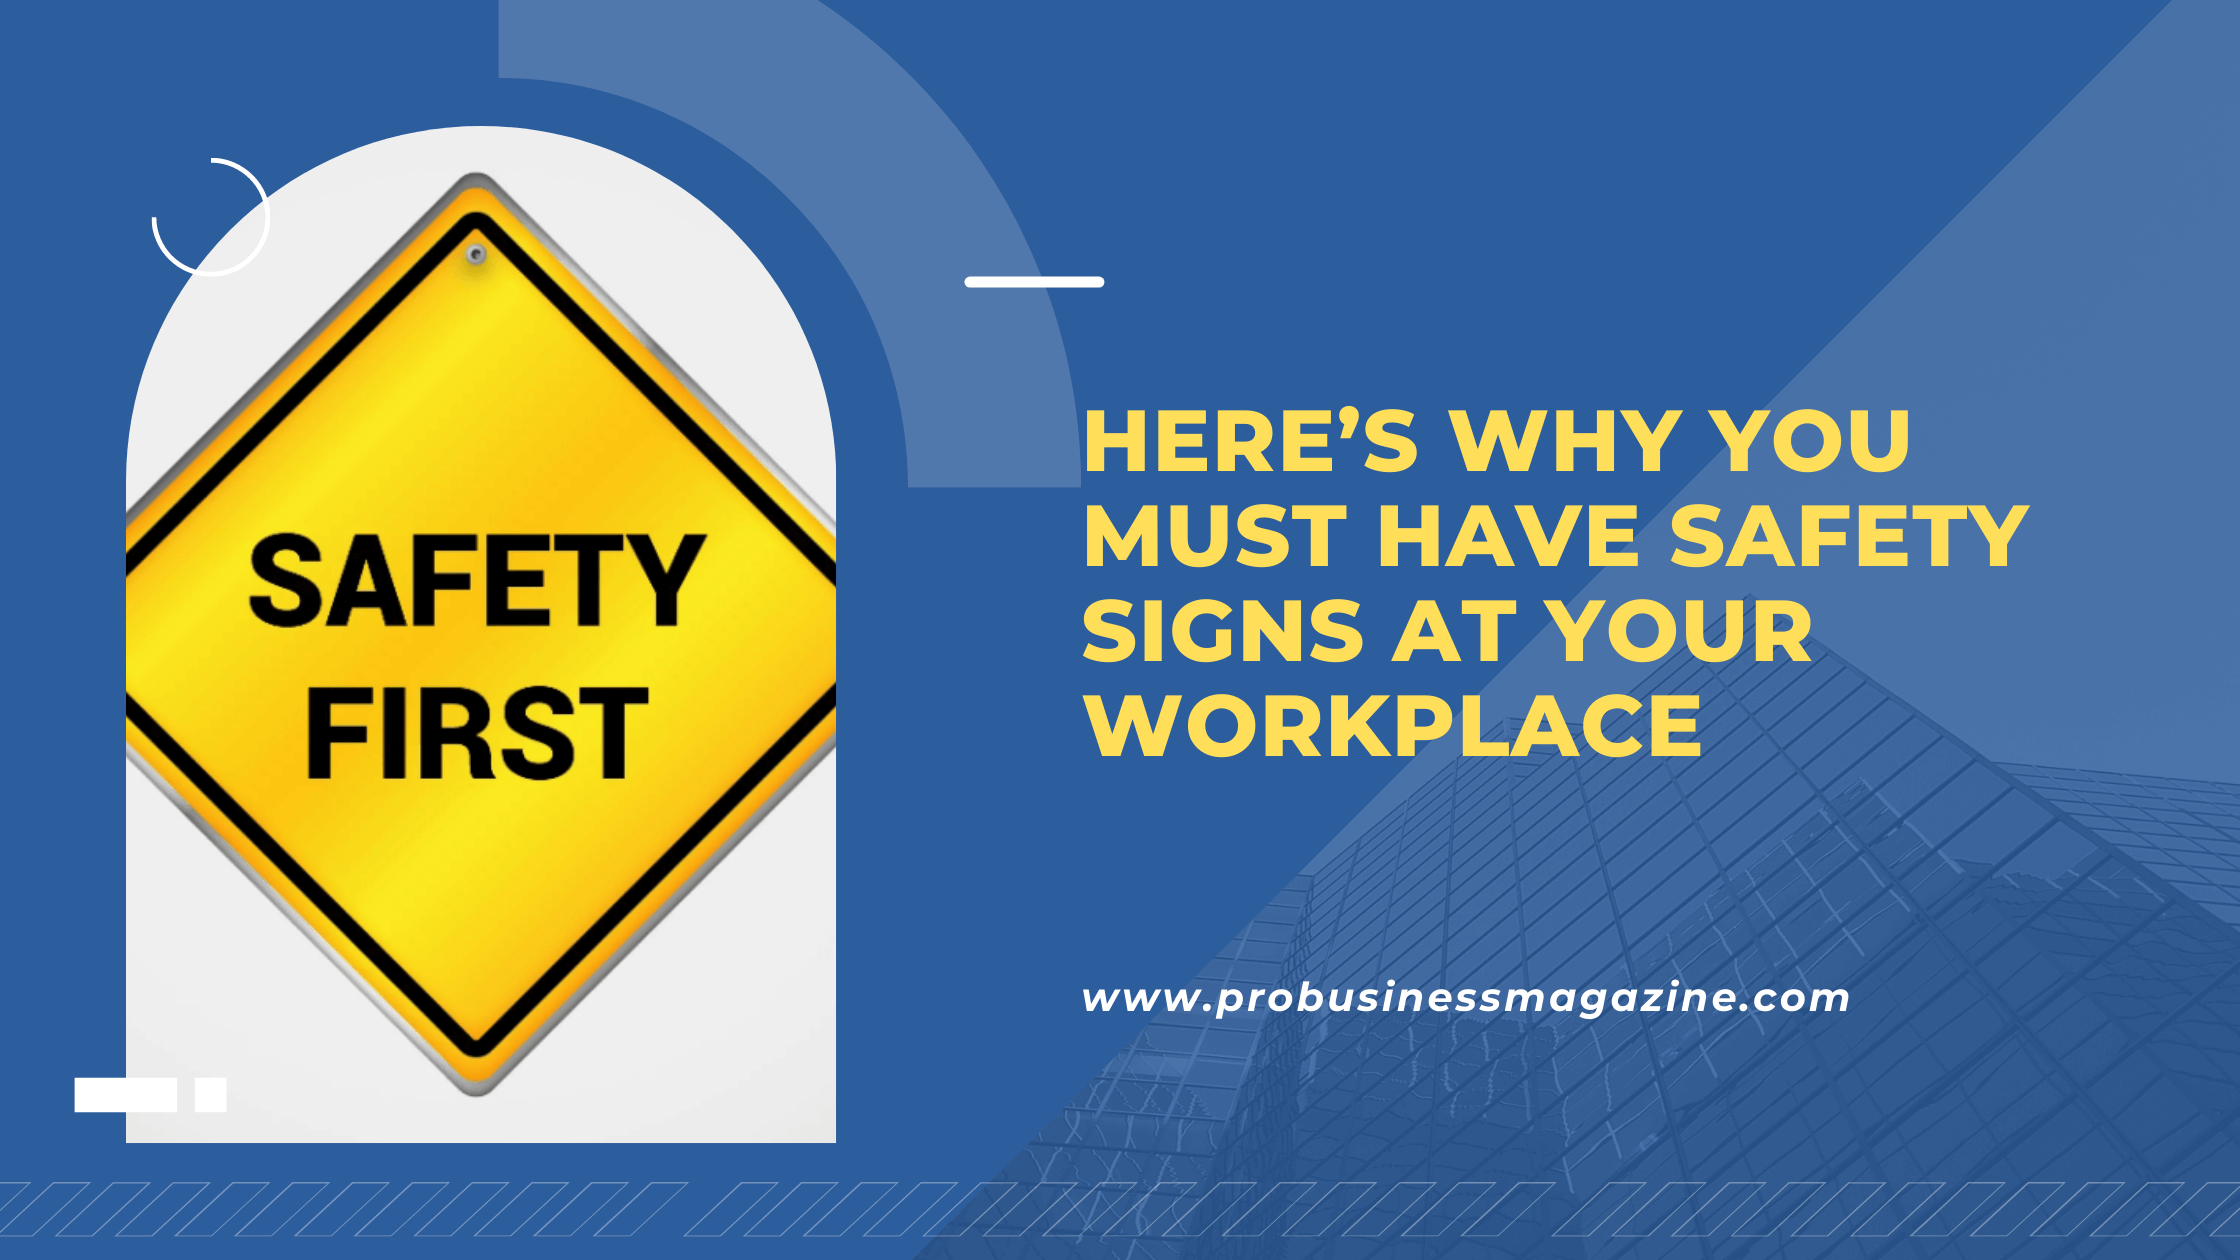 Here’s Why You Must Have Safety Signs At Your Workplace